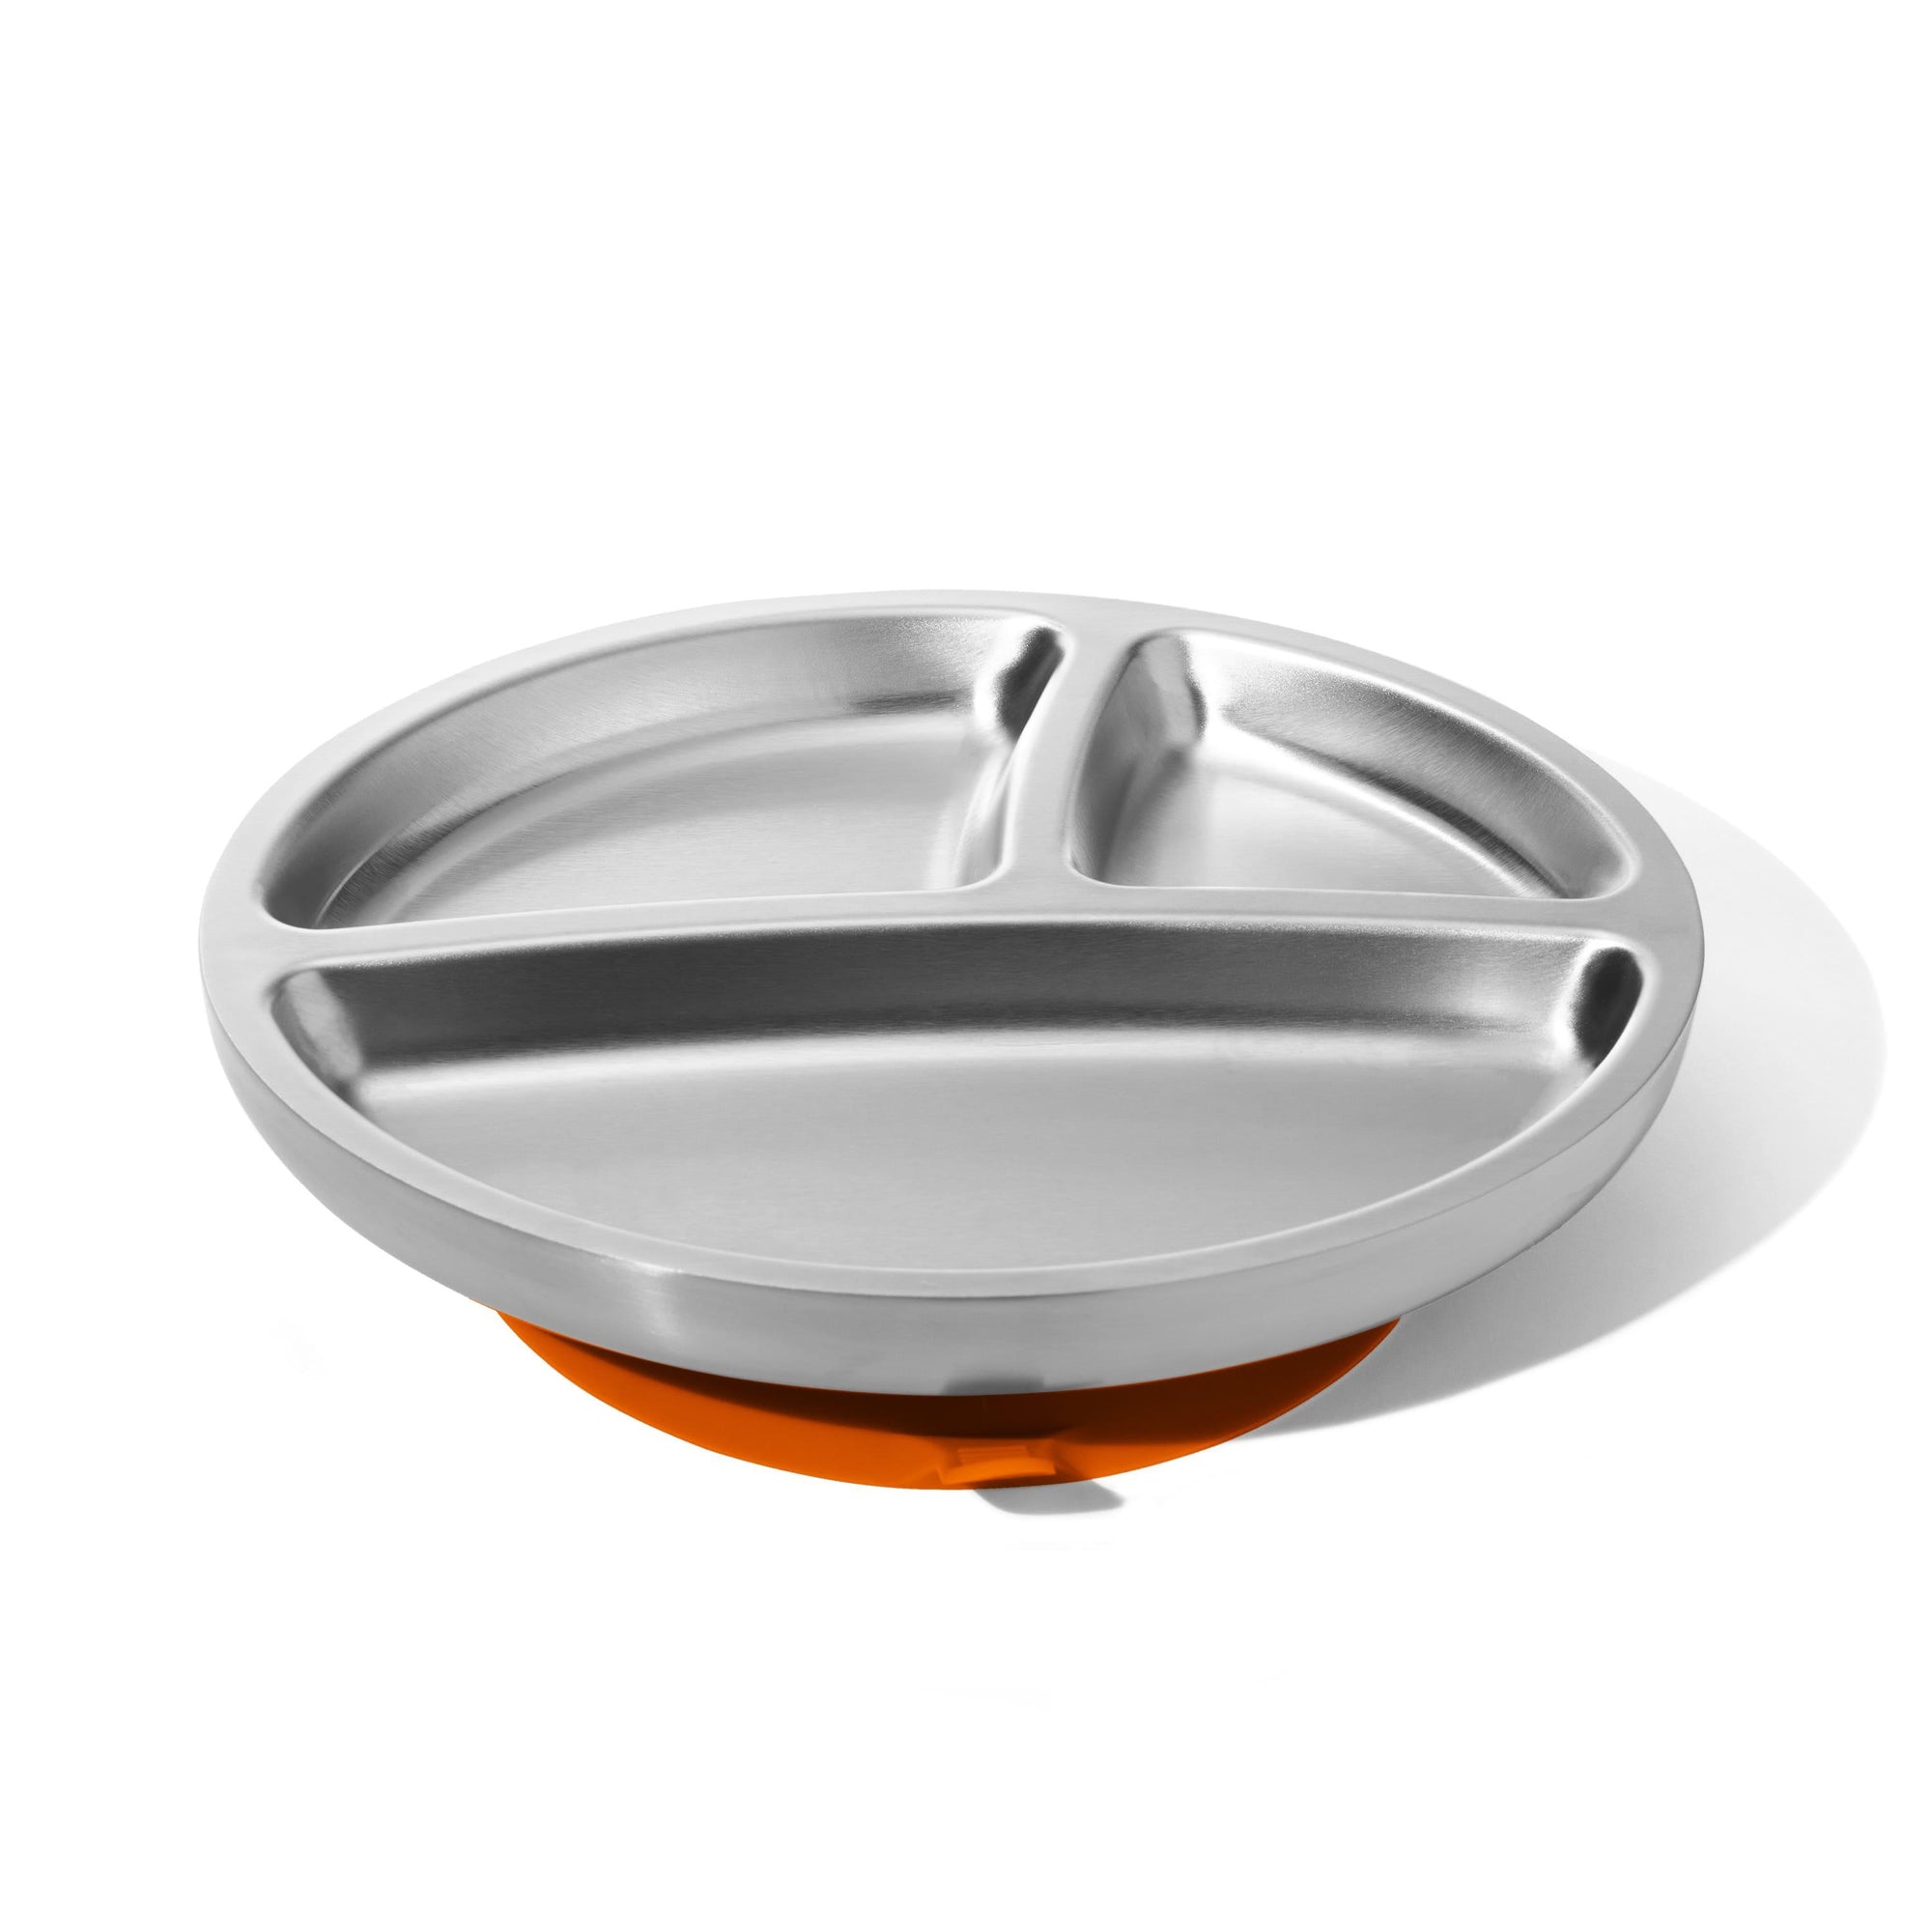 Stainless Steel Suction Toddler Plate - Avanchy Sustainable Baby Dishware